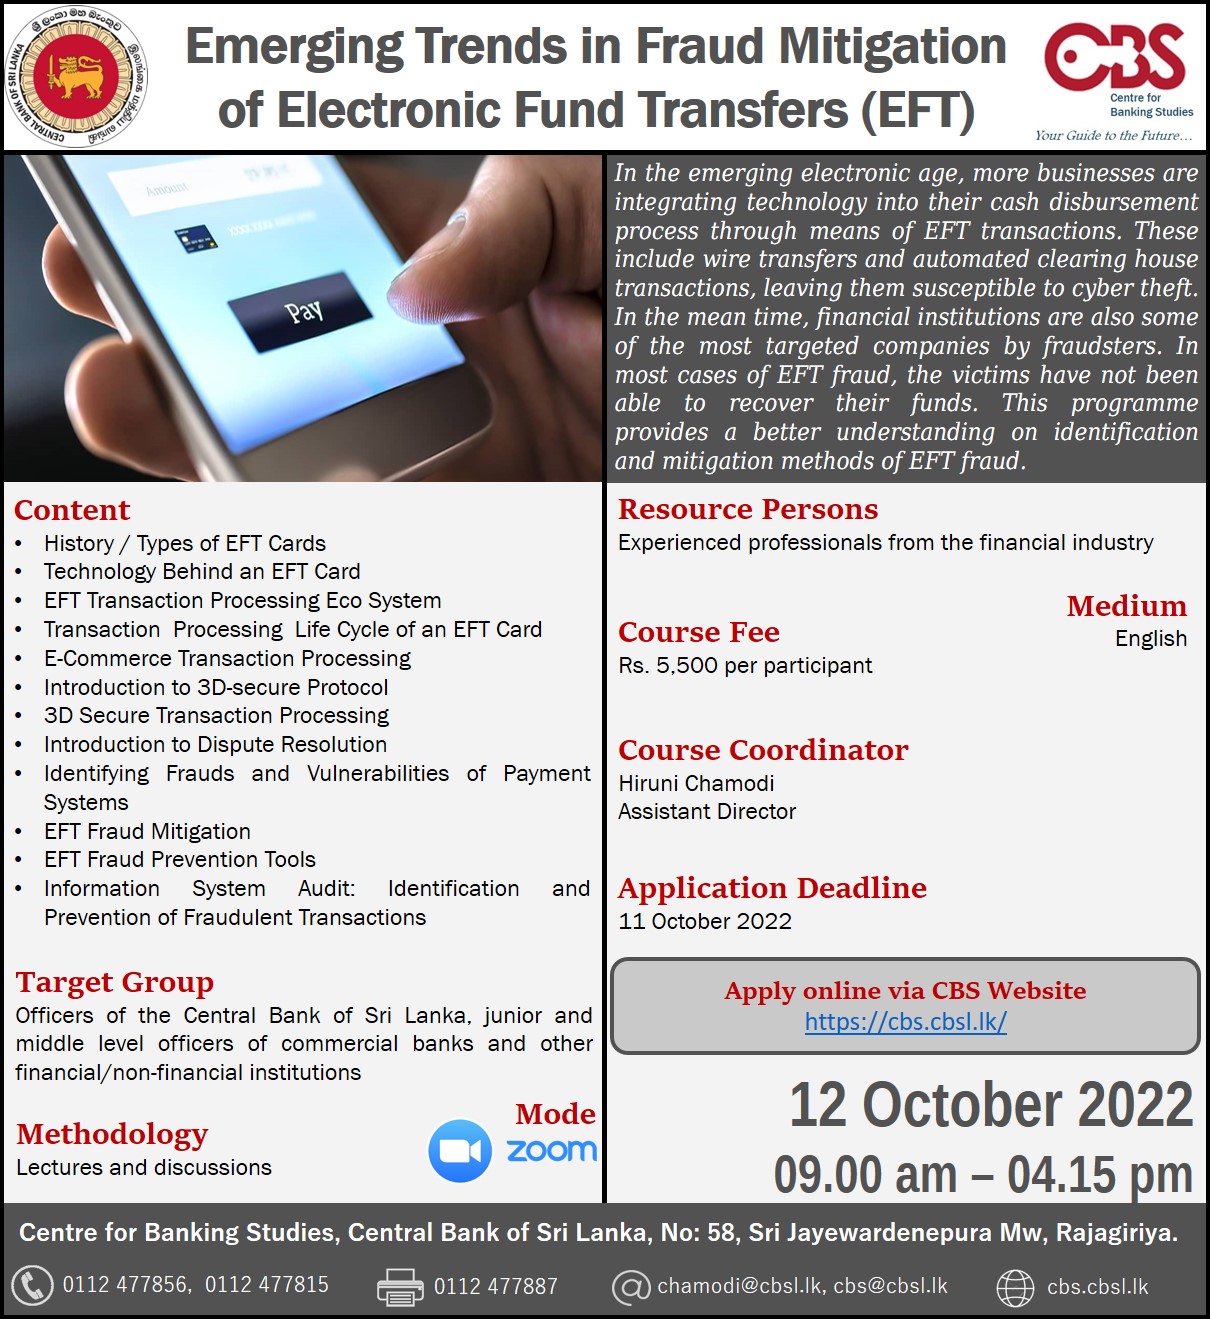 Emerging Trends in Fraud Mitigation of Electronic Fund Transfers (EFT)